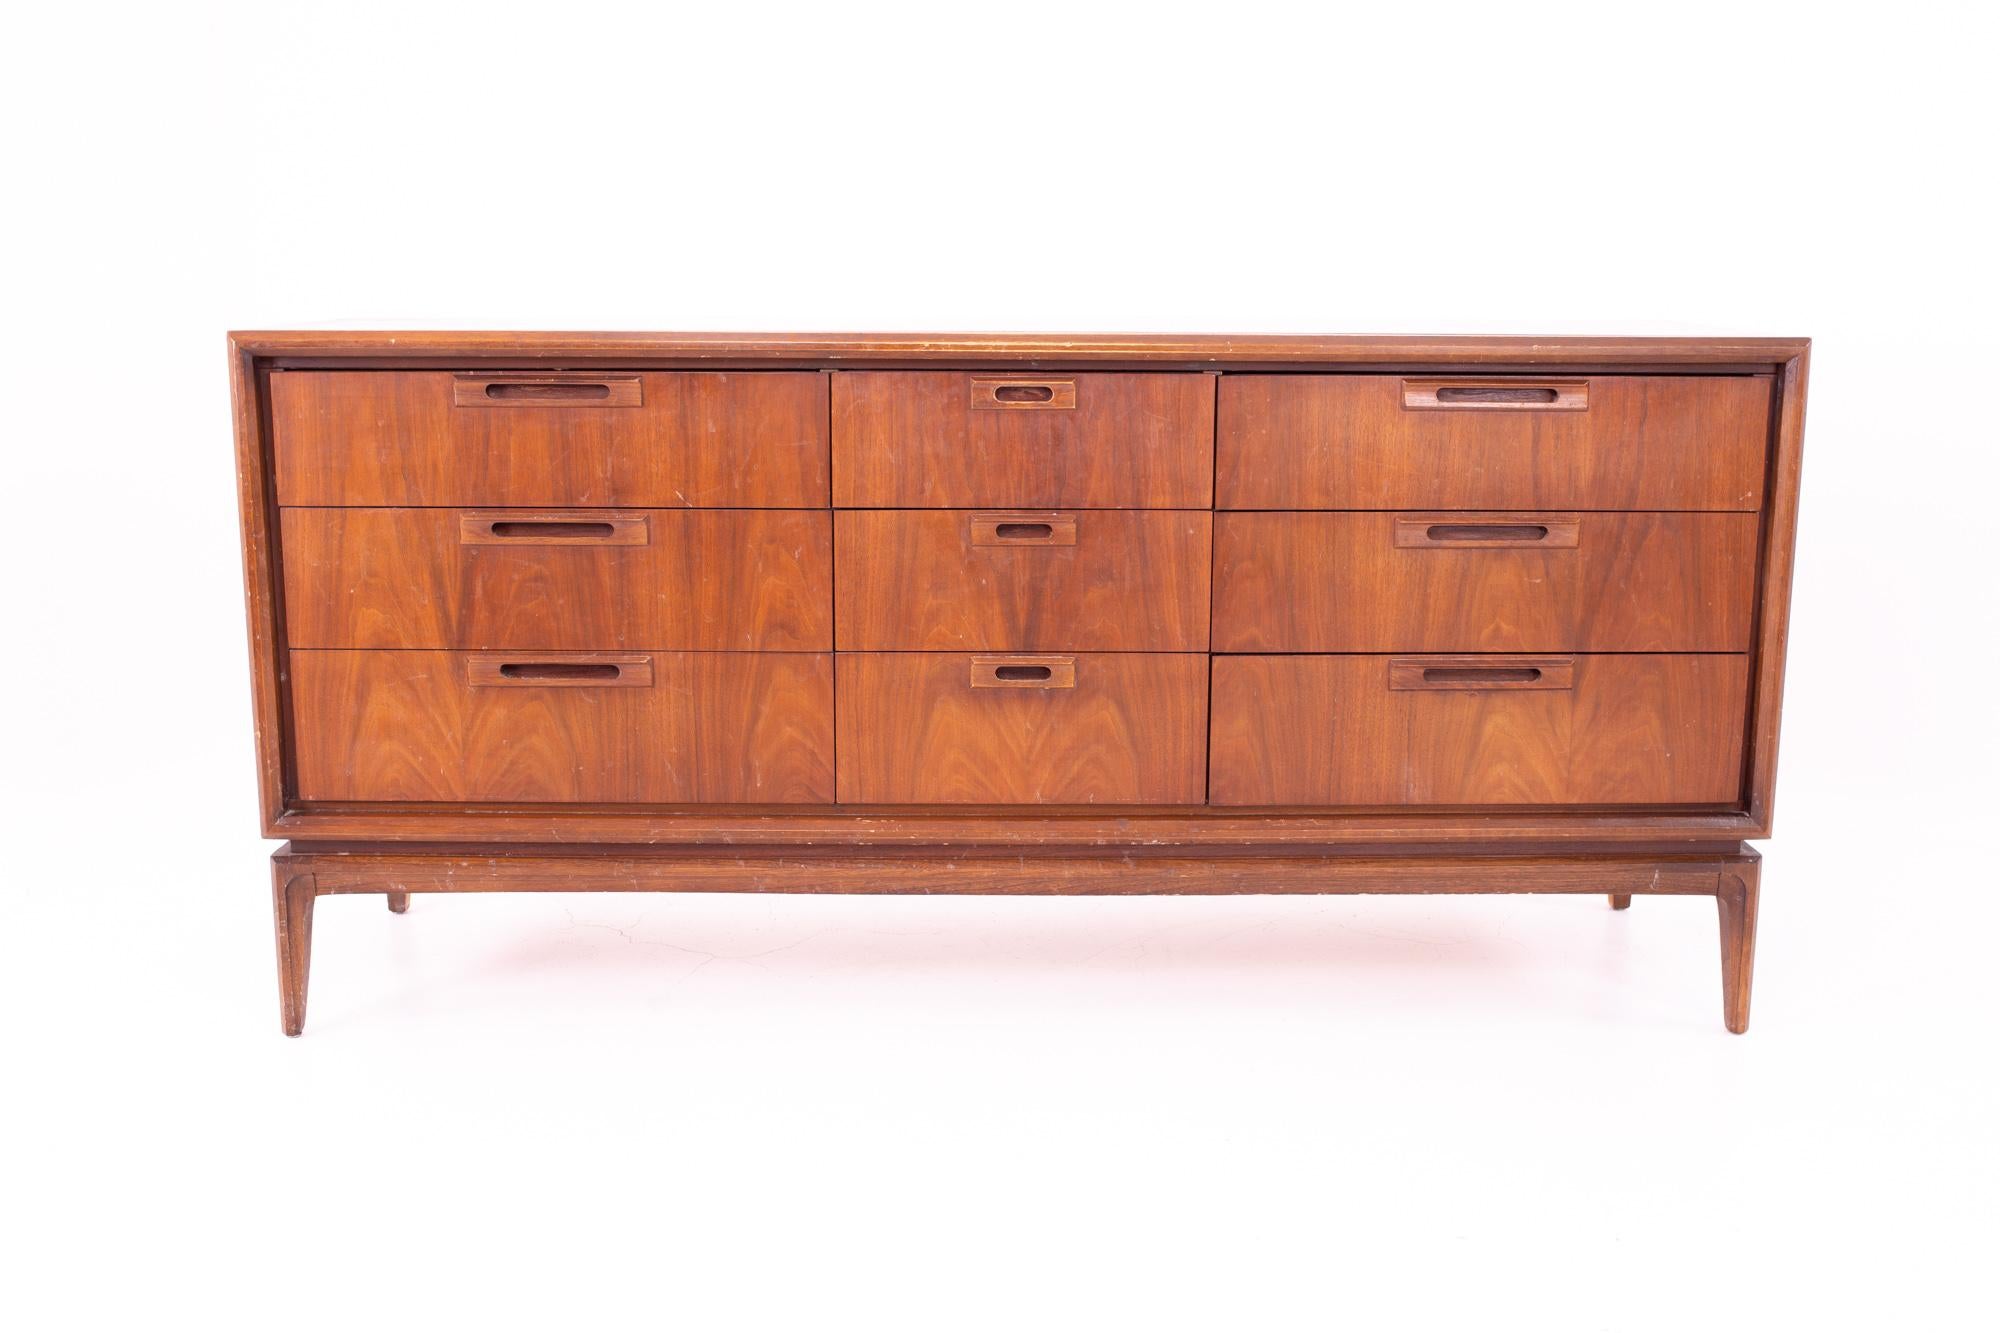 United Mid Century 9-drawer lowboy dresser
Dresser measures: 66 wide x 19 deep x 31.5 high
This price includes getting this piece in what we call restored vintage condition. That means the piece is permanently fixed upon purchase so it’s free of